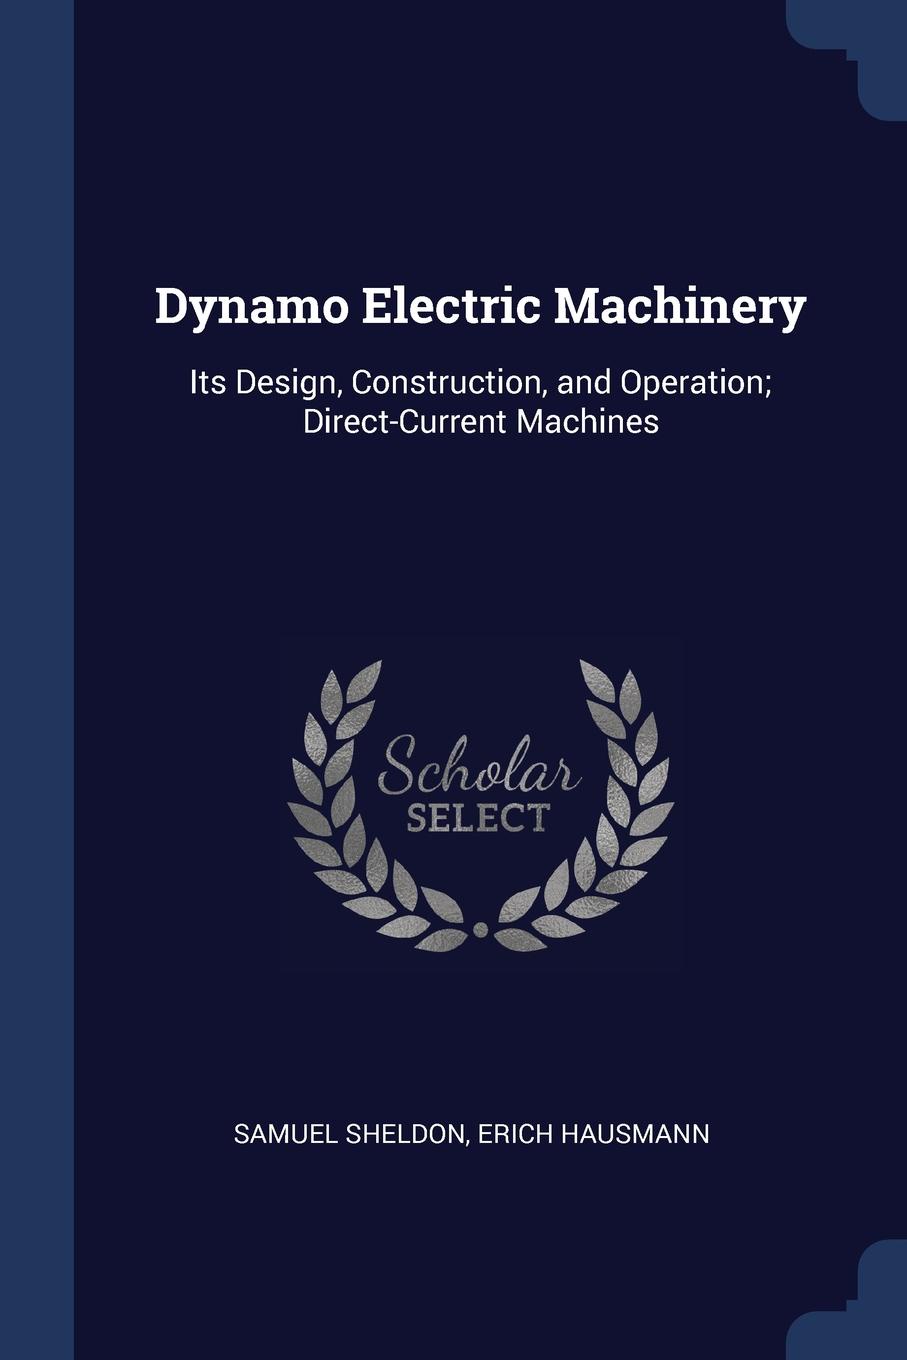 Dynamo Electric Machinery. Its Design, Construction, and Operation; Direct-Current Machines